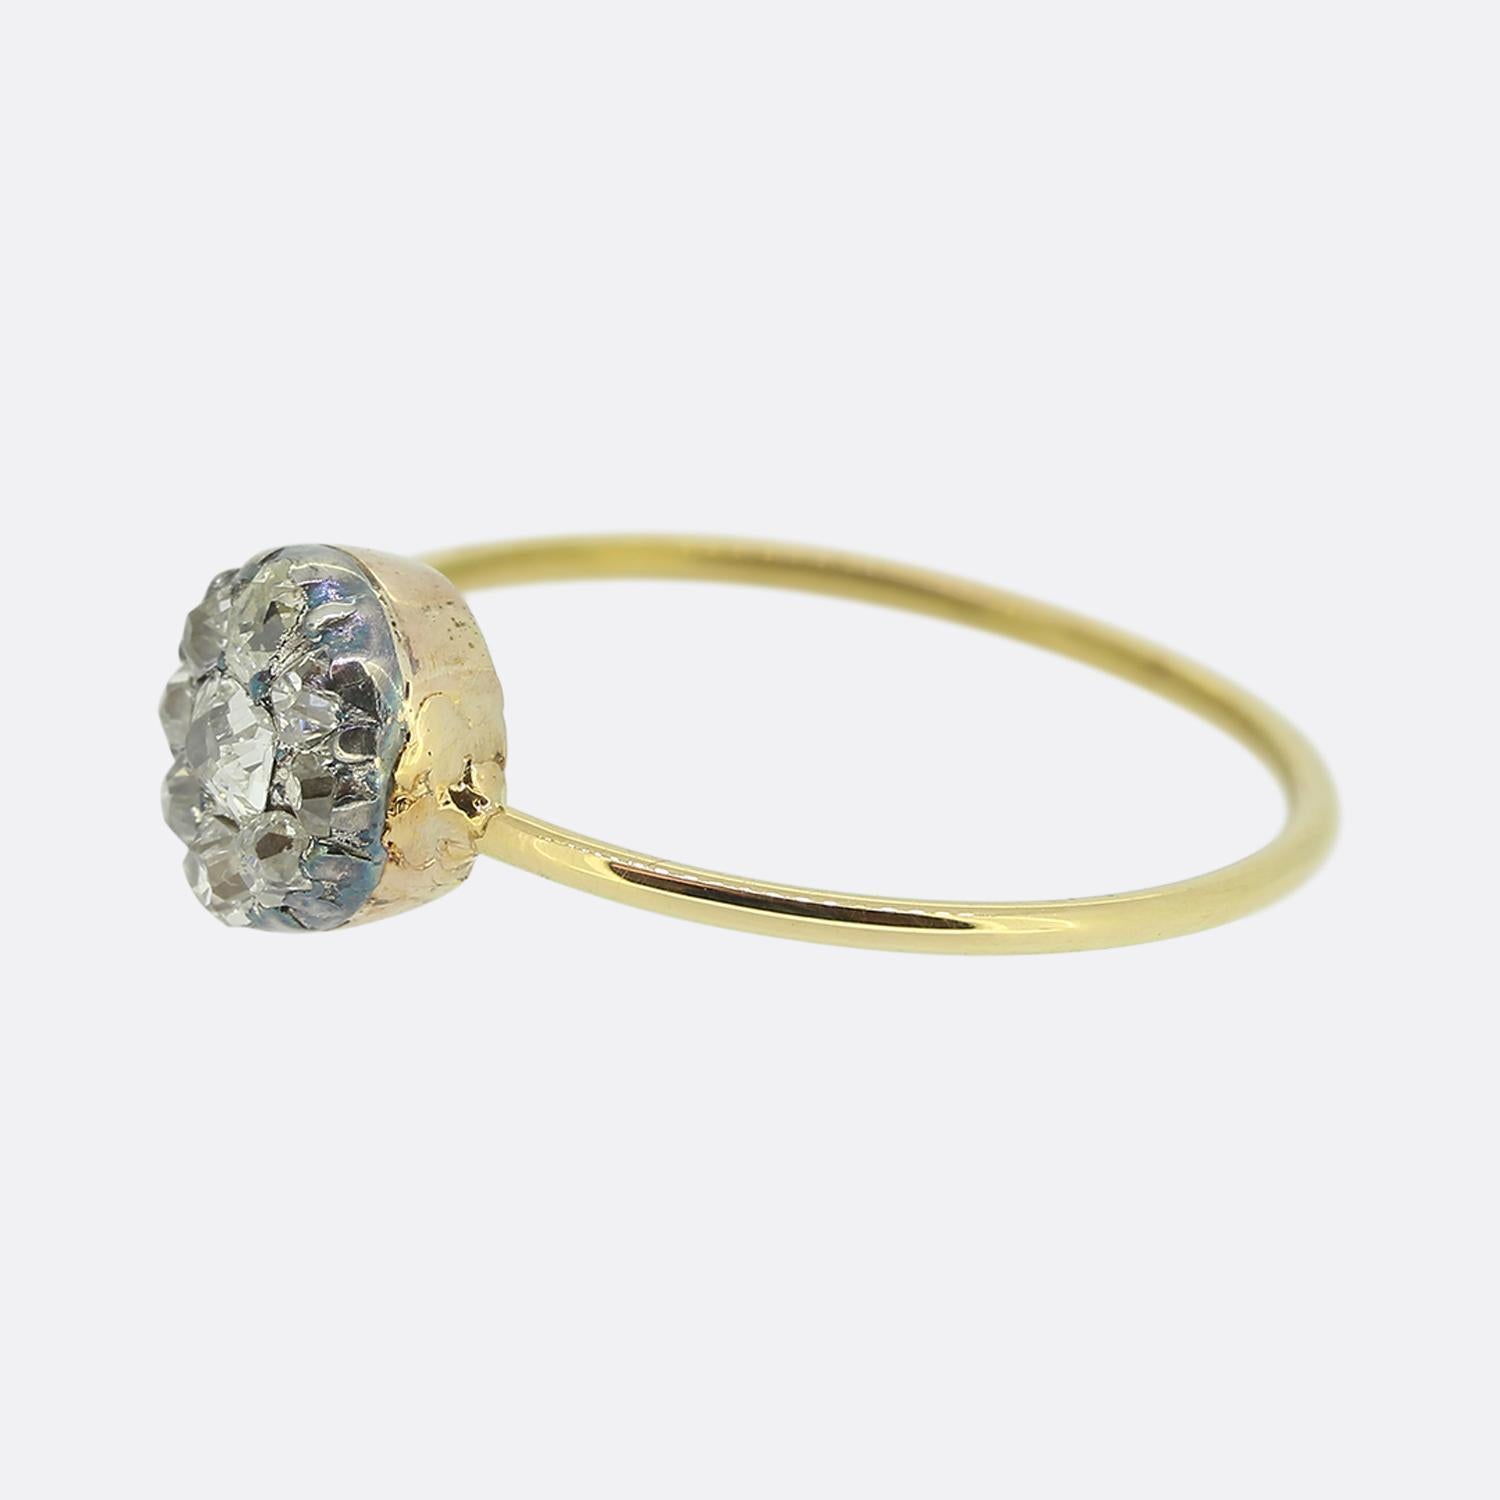 Here we a delightful diamond cluster ring. The piece originally dates back to the Victorian period and showcases a chunky old cushion cut diamond at the centre of the face surrounded by a circulating array of slightly smaller matching stones. All